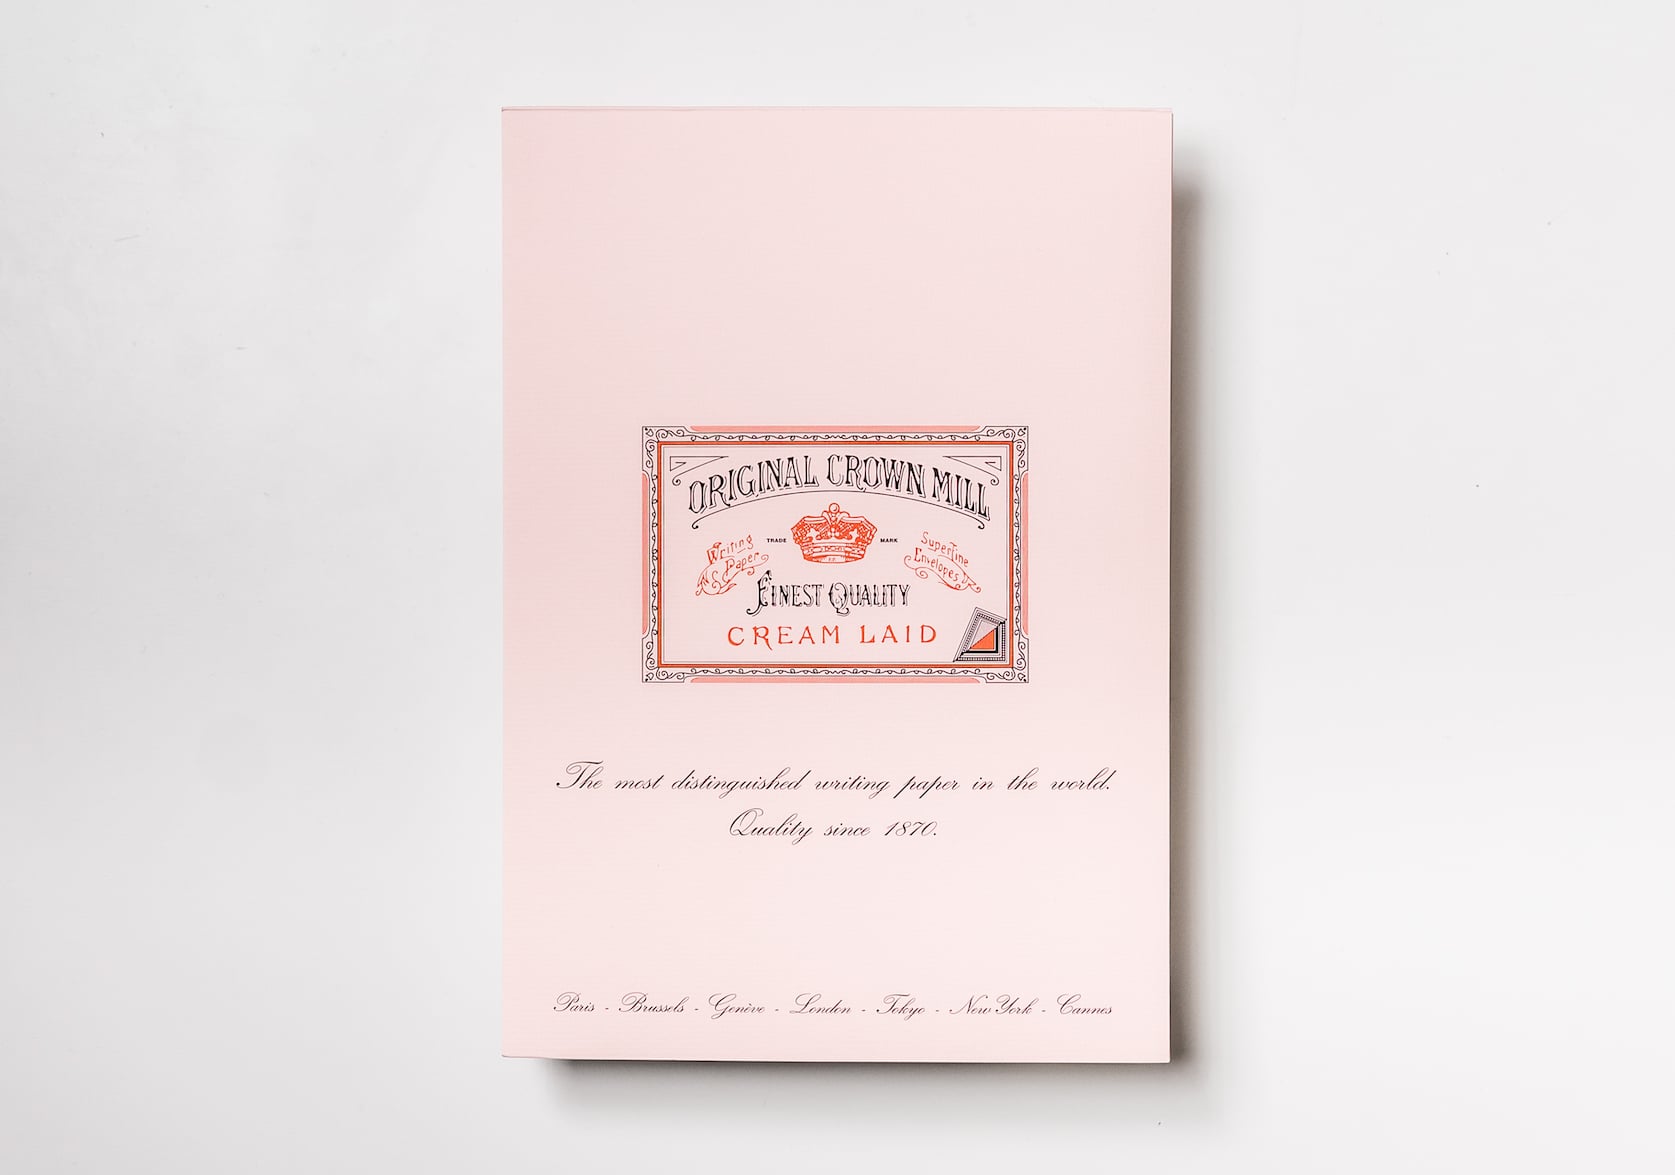 Pink Notepad sized A4. In the centre there is a stamped red & black logo with a red crown. Text that reads: Original Crown Mill. Finest Quality. Cream Laid. Below cursive text reads: The most distinguishable writing paper in the world. Quality since 1870.